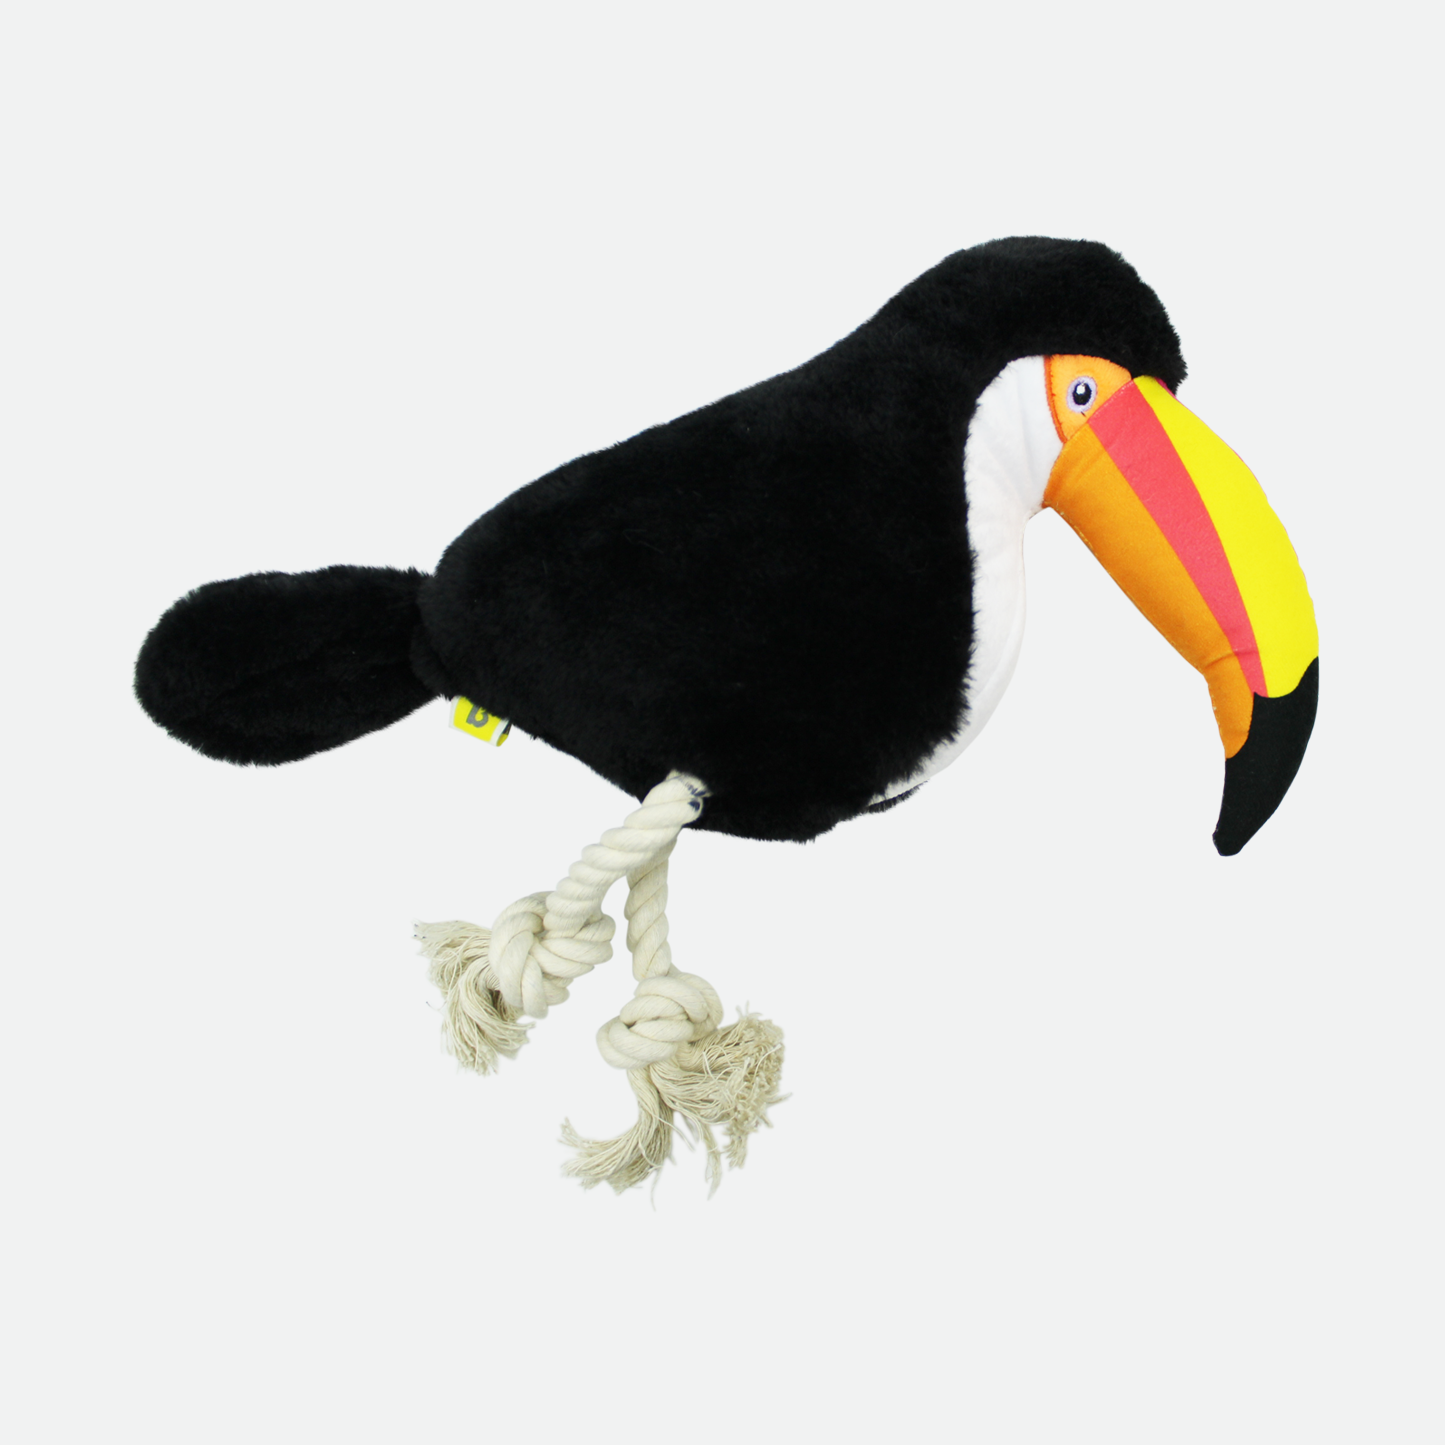 Plush toy for dog, toucan style